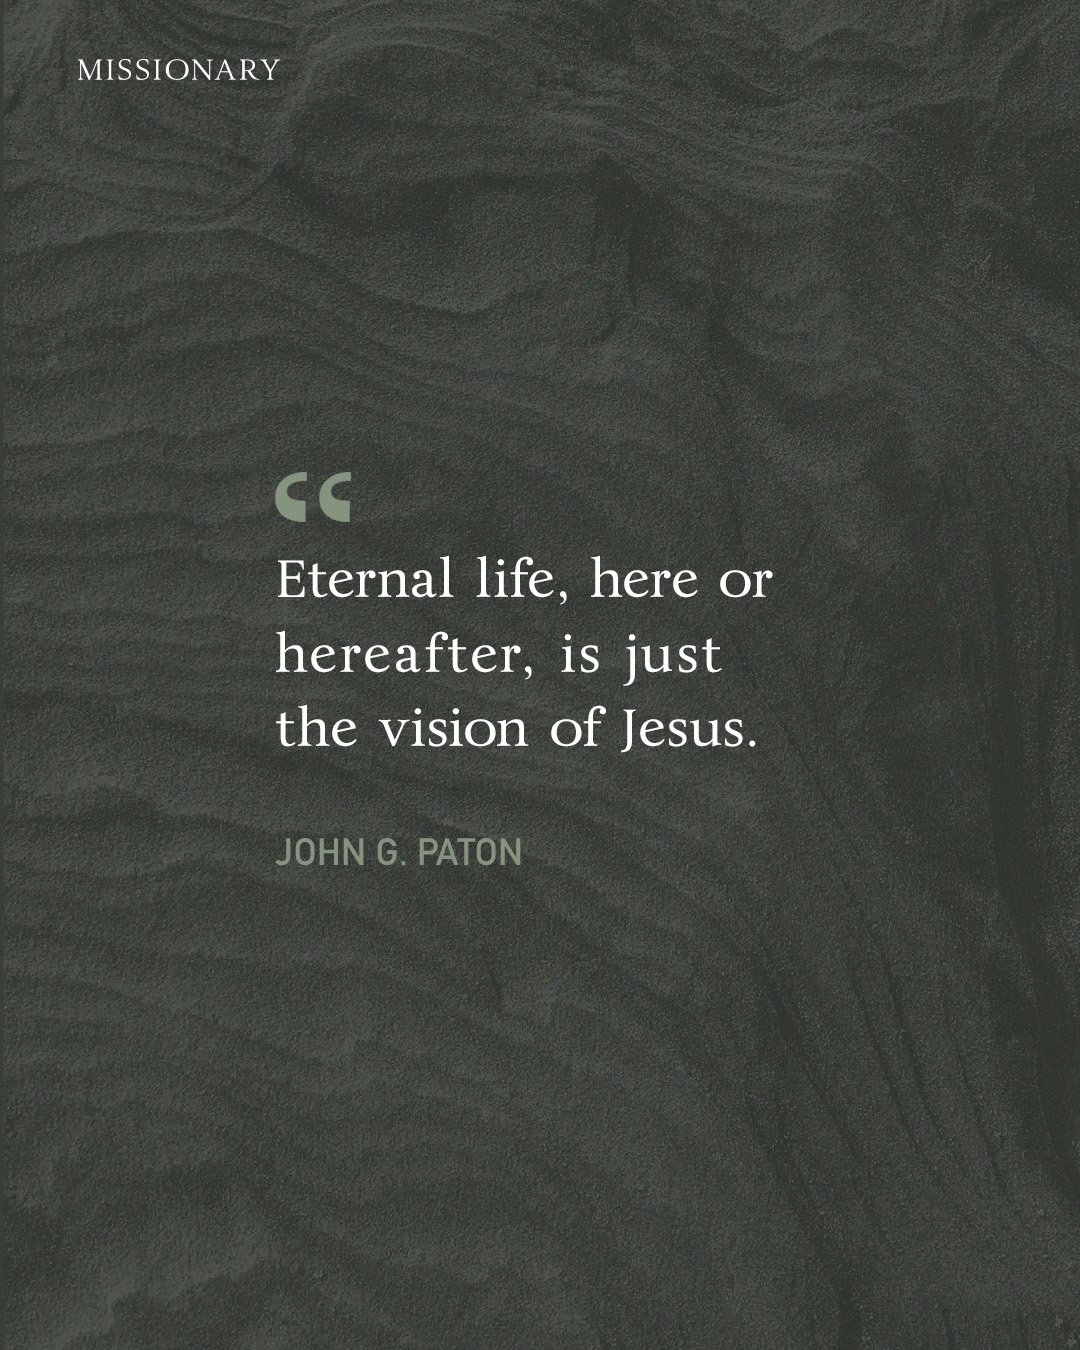 &ldquo;Eternal life, here or hereafter, is just the vision of Jesus.&rdquo; &mdash; John G. Paton